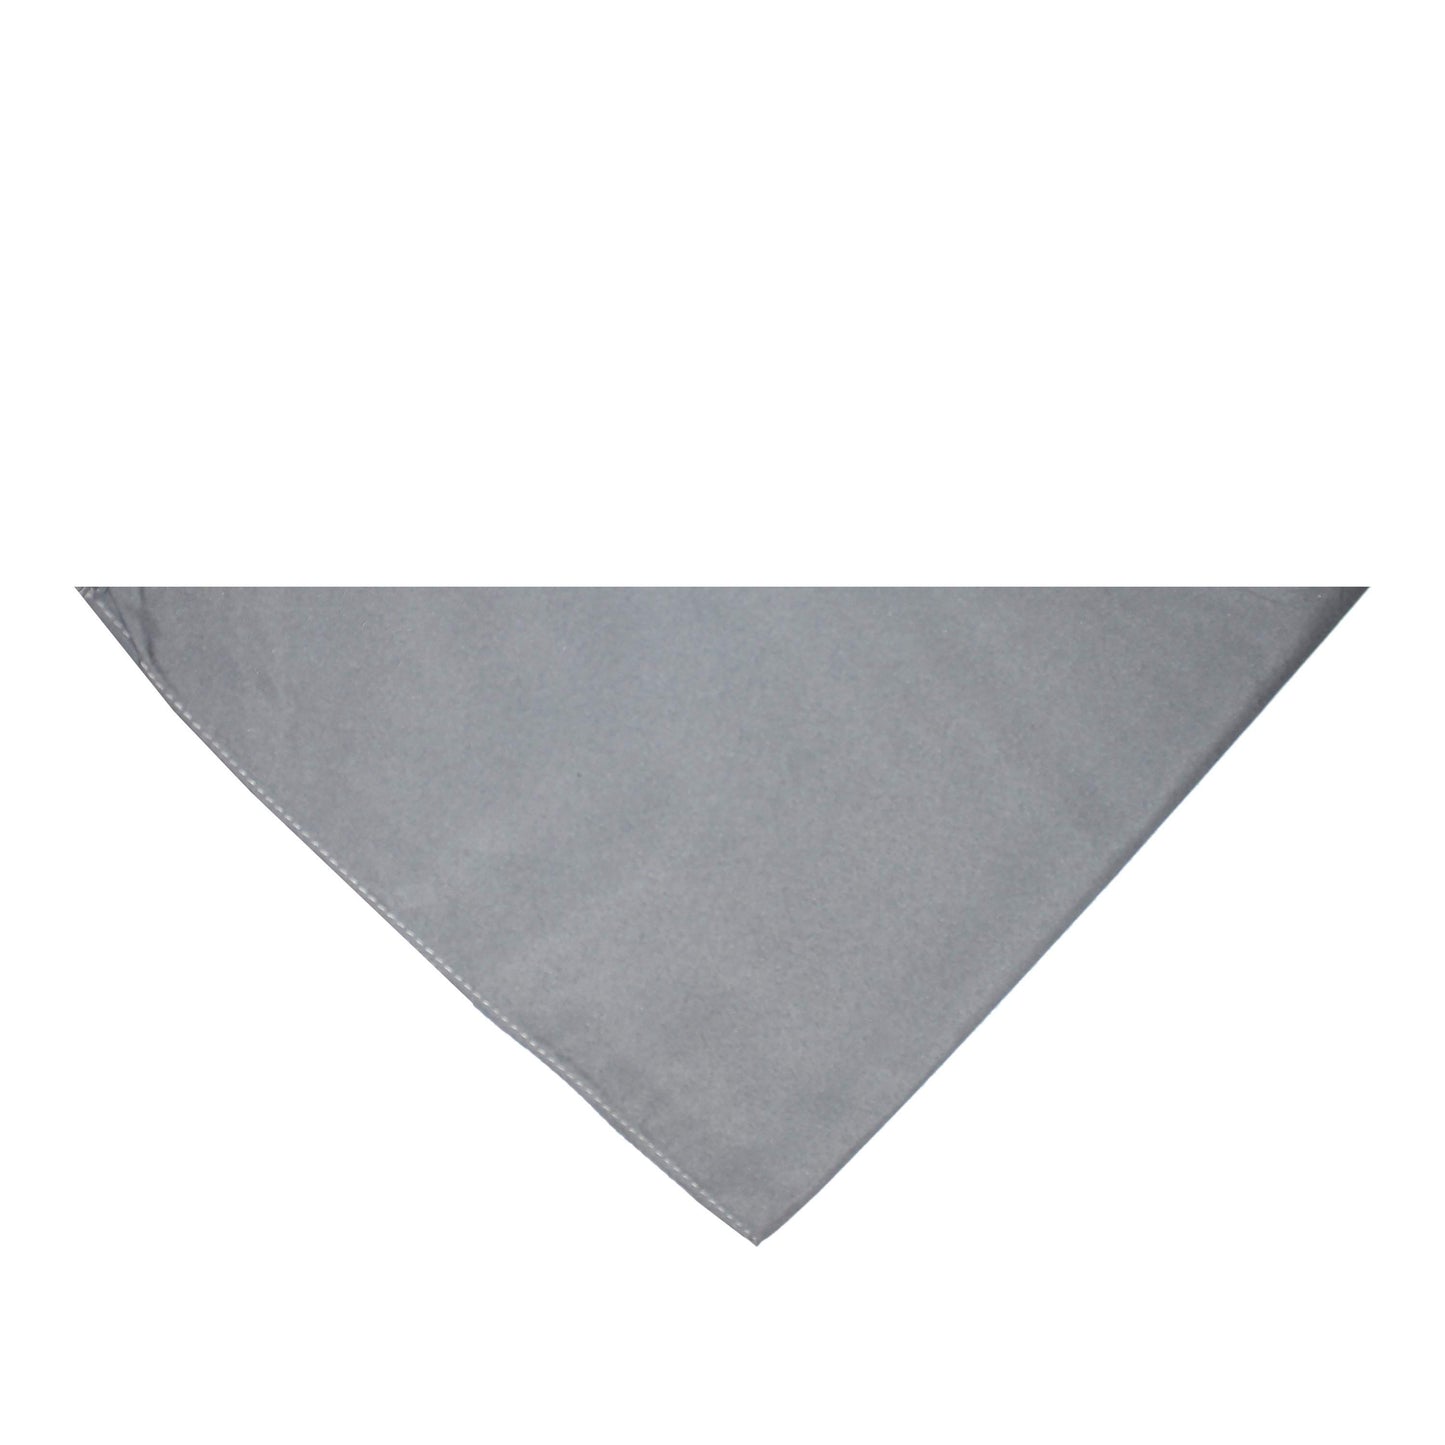 Pack of 12 Jordefano Triangle Bandanas - Solid Colors and Polyester - 30 in x 19 in x 19 in